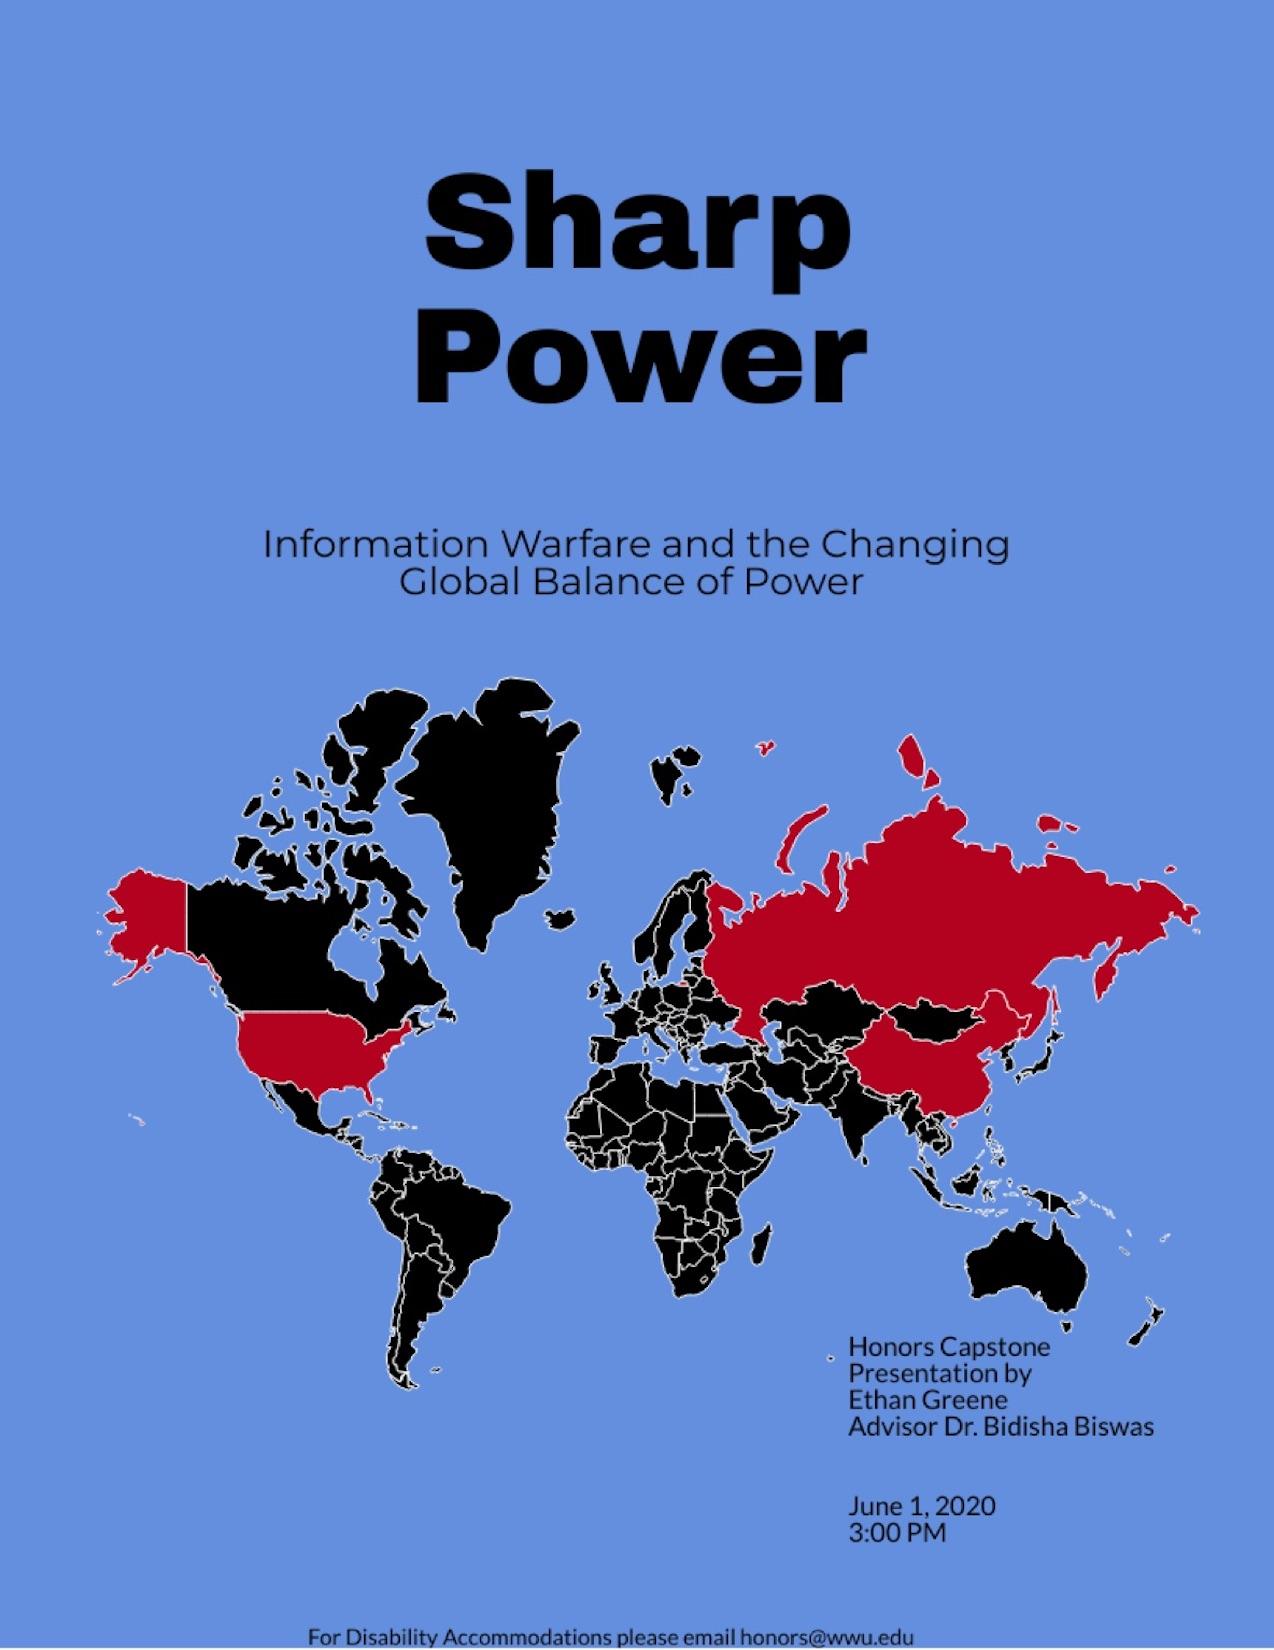 Image: A map of the world with all countries colored in black except for Russia, China, and the United States, which are colored in red. Text: "Sharp Power: Information Warfare and the Changing Global Balance of Power. Honors Capstone Presentation by Ethan Greene Advisor Dr. Bidisha Biswas. June 1, 2020 3:00 PM. For Disability Accommodations please email honors@wwu.edu."